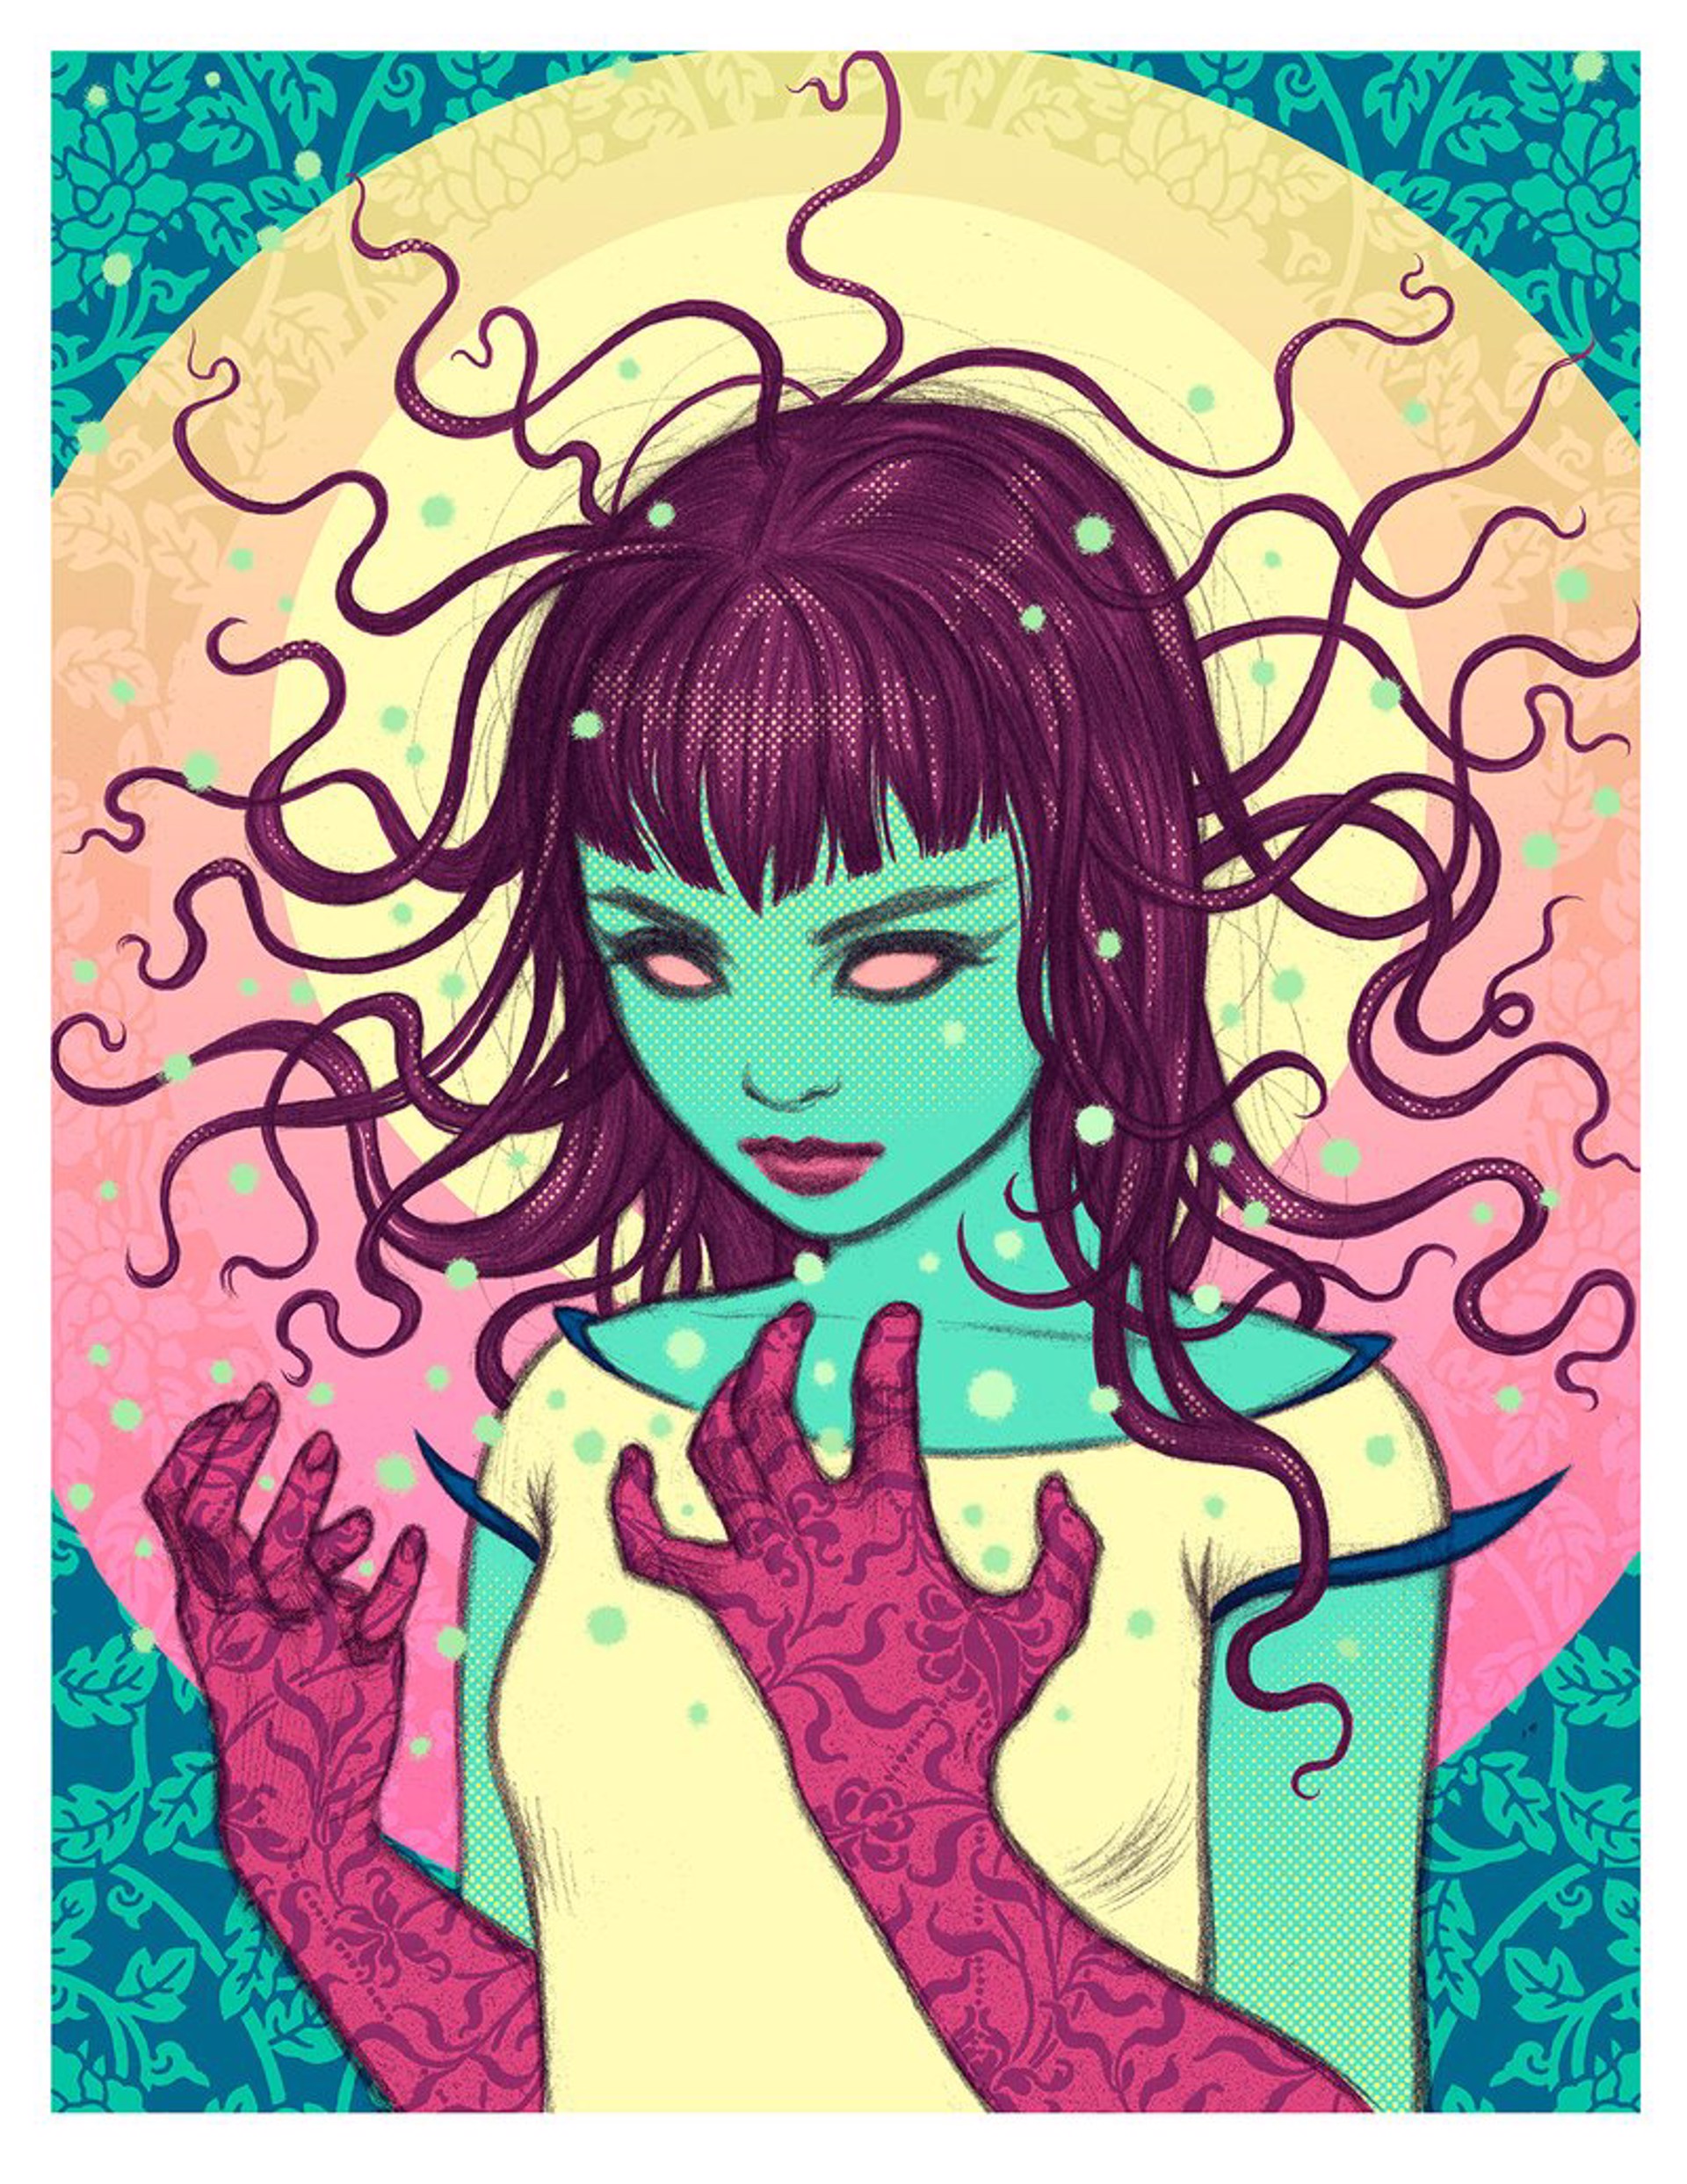 The Absence of Gravity (13/200) by Tara McPherson